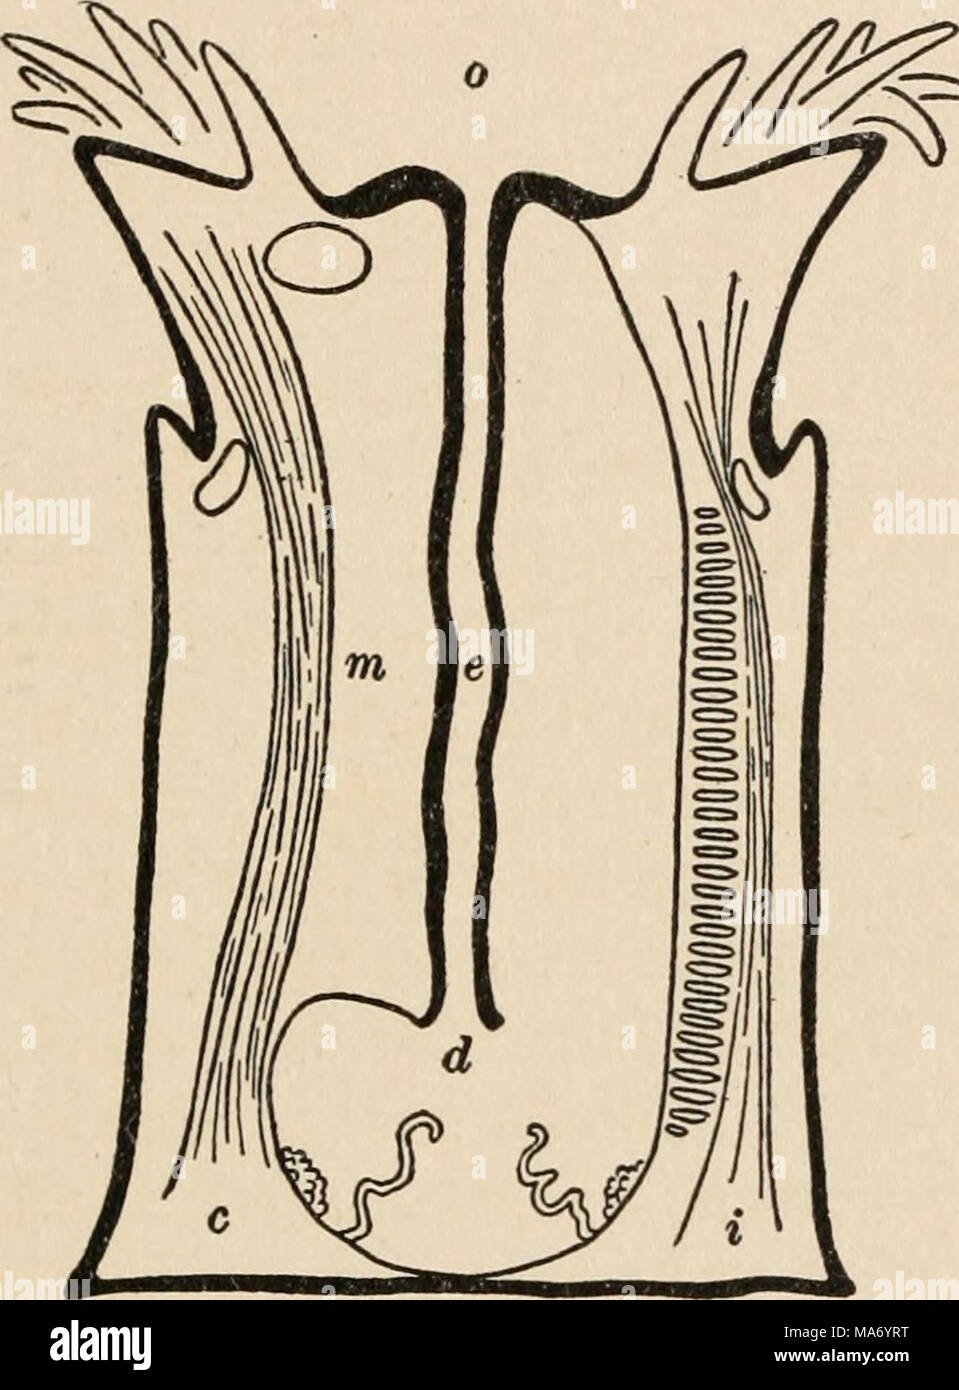 . The elementary nervous system . P FIG. 17.—Diagram of a longitudinal section of the sea-anemone Metridium; the area of attachment is the pedal disc p; in the middle of the oral disc o is the mouth leading into the oesophagus e which opens into the digestive cavity d. The oesophagus is held in place by the mesenteries m when complete c, the incomplete mesenteries i failing to reach this tube. disc, a cluster of tentacles in the center of which is the mouth. The mouth does not open directly into the single large internal space, the digestive cavity, but leads to a somewhat elongated oesophagus Stock Photo